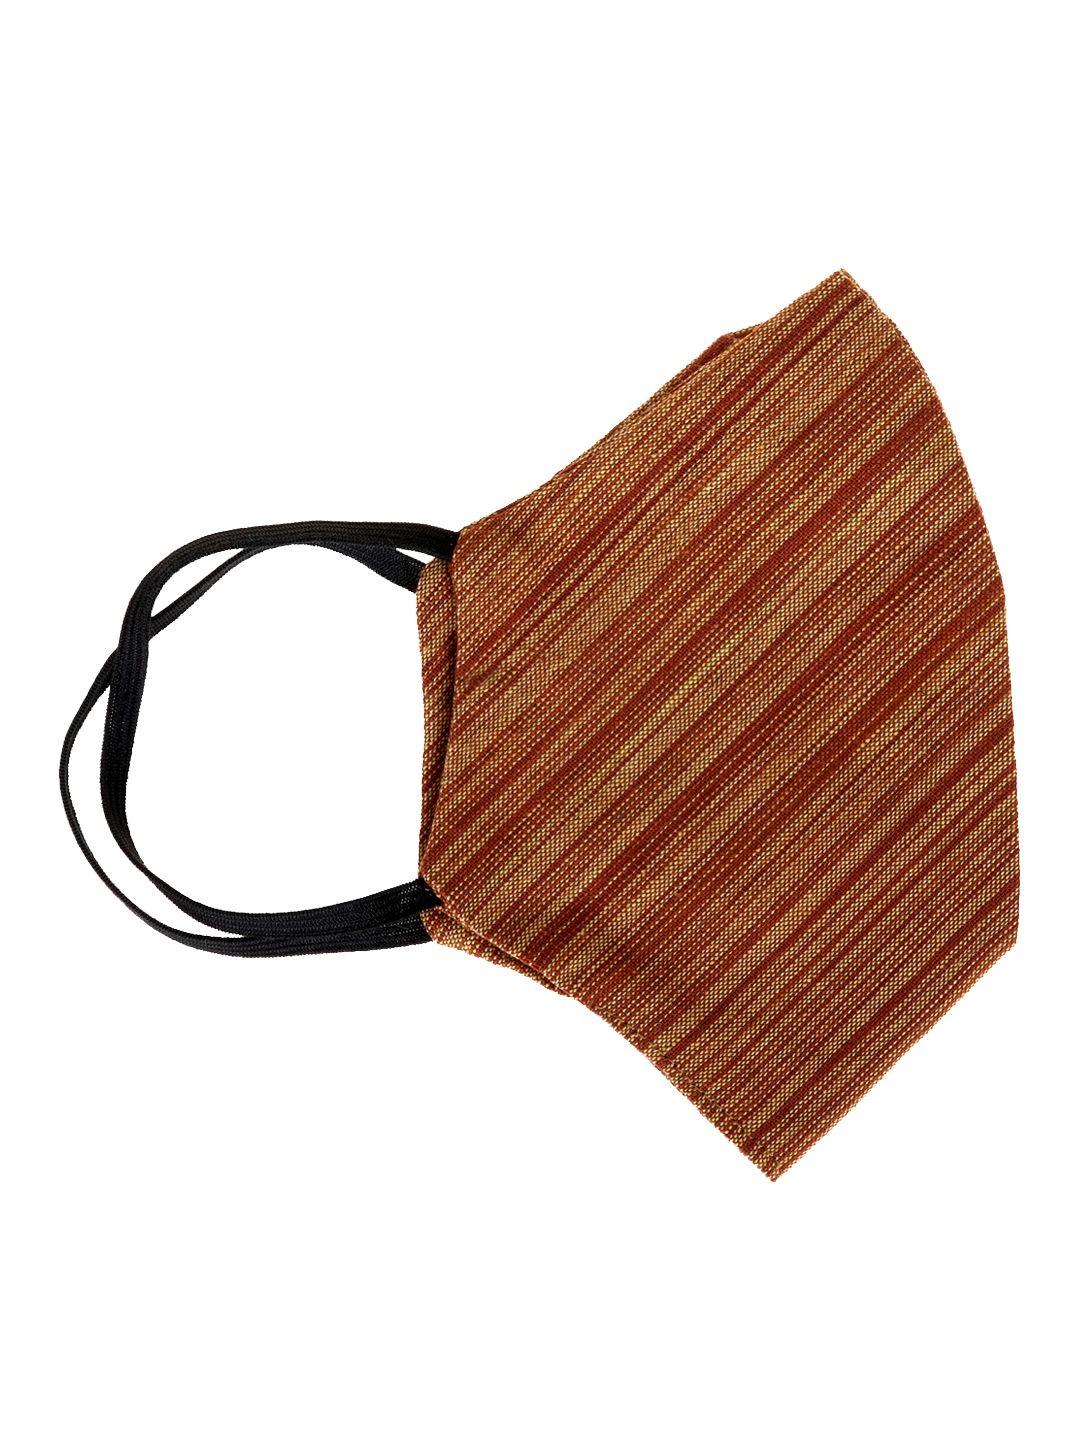 panash unisex brown striped reusable 2-ply protective outdoor khadi mask